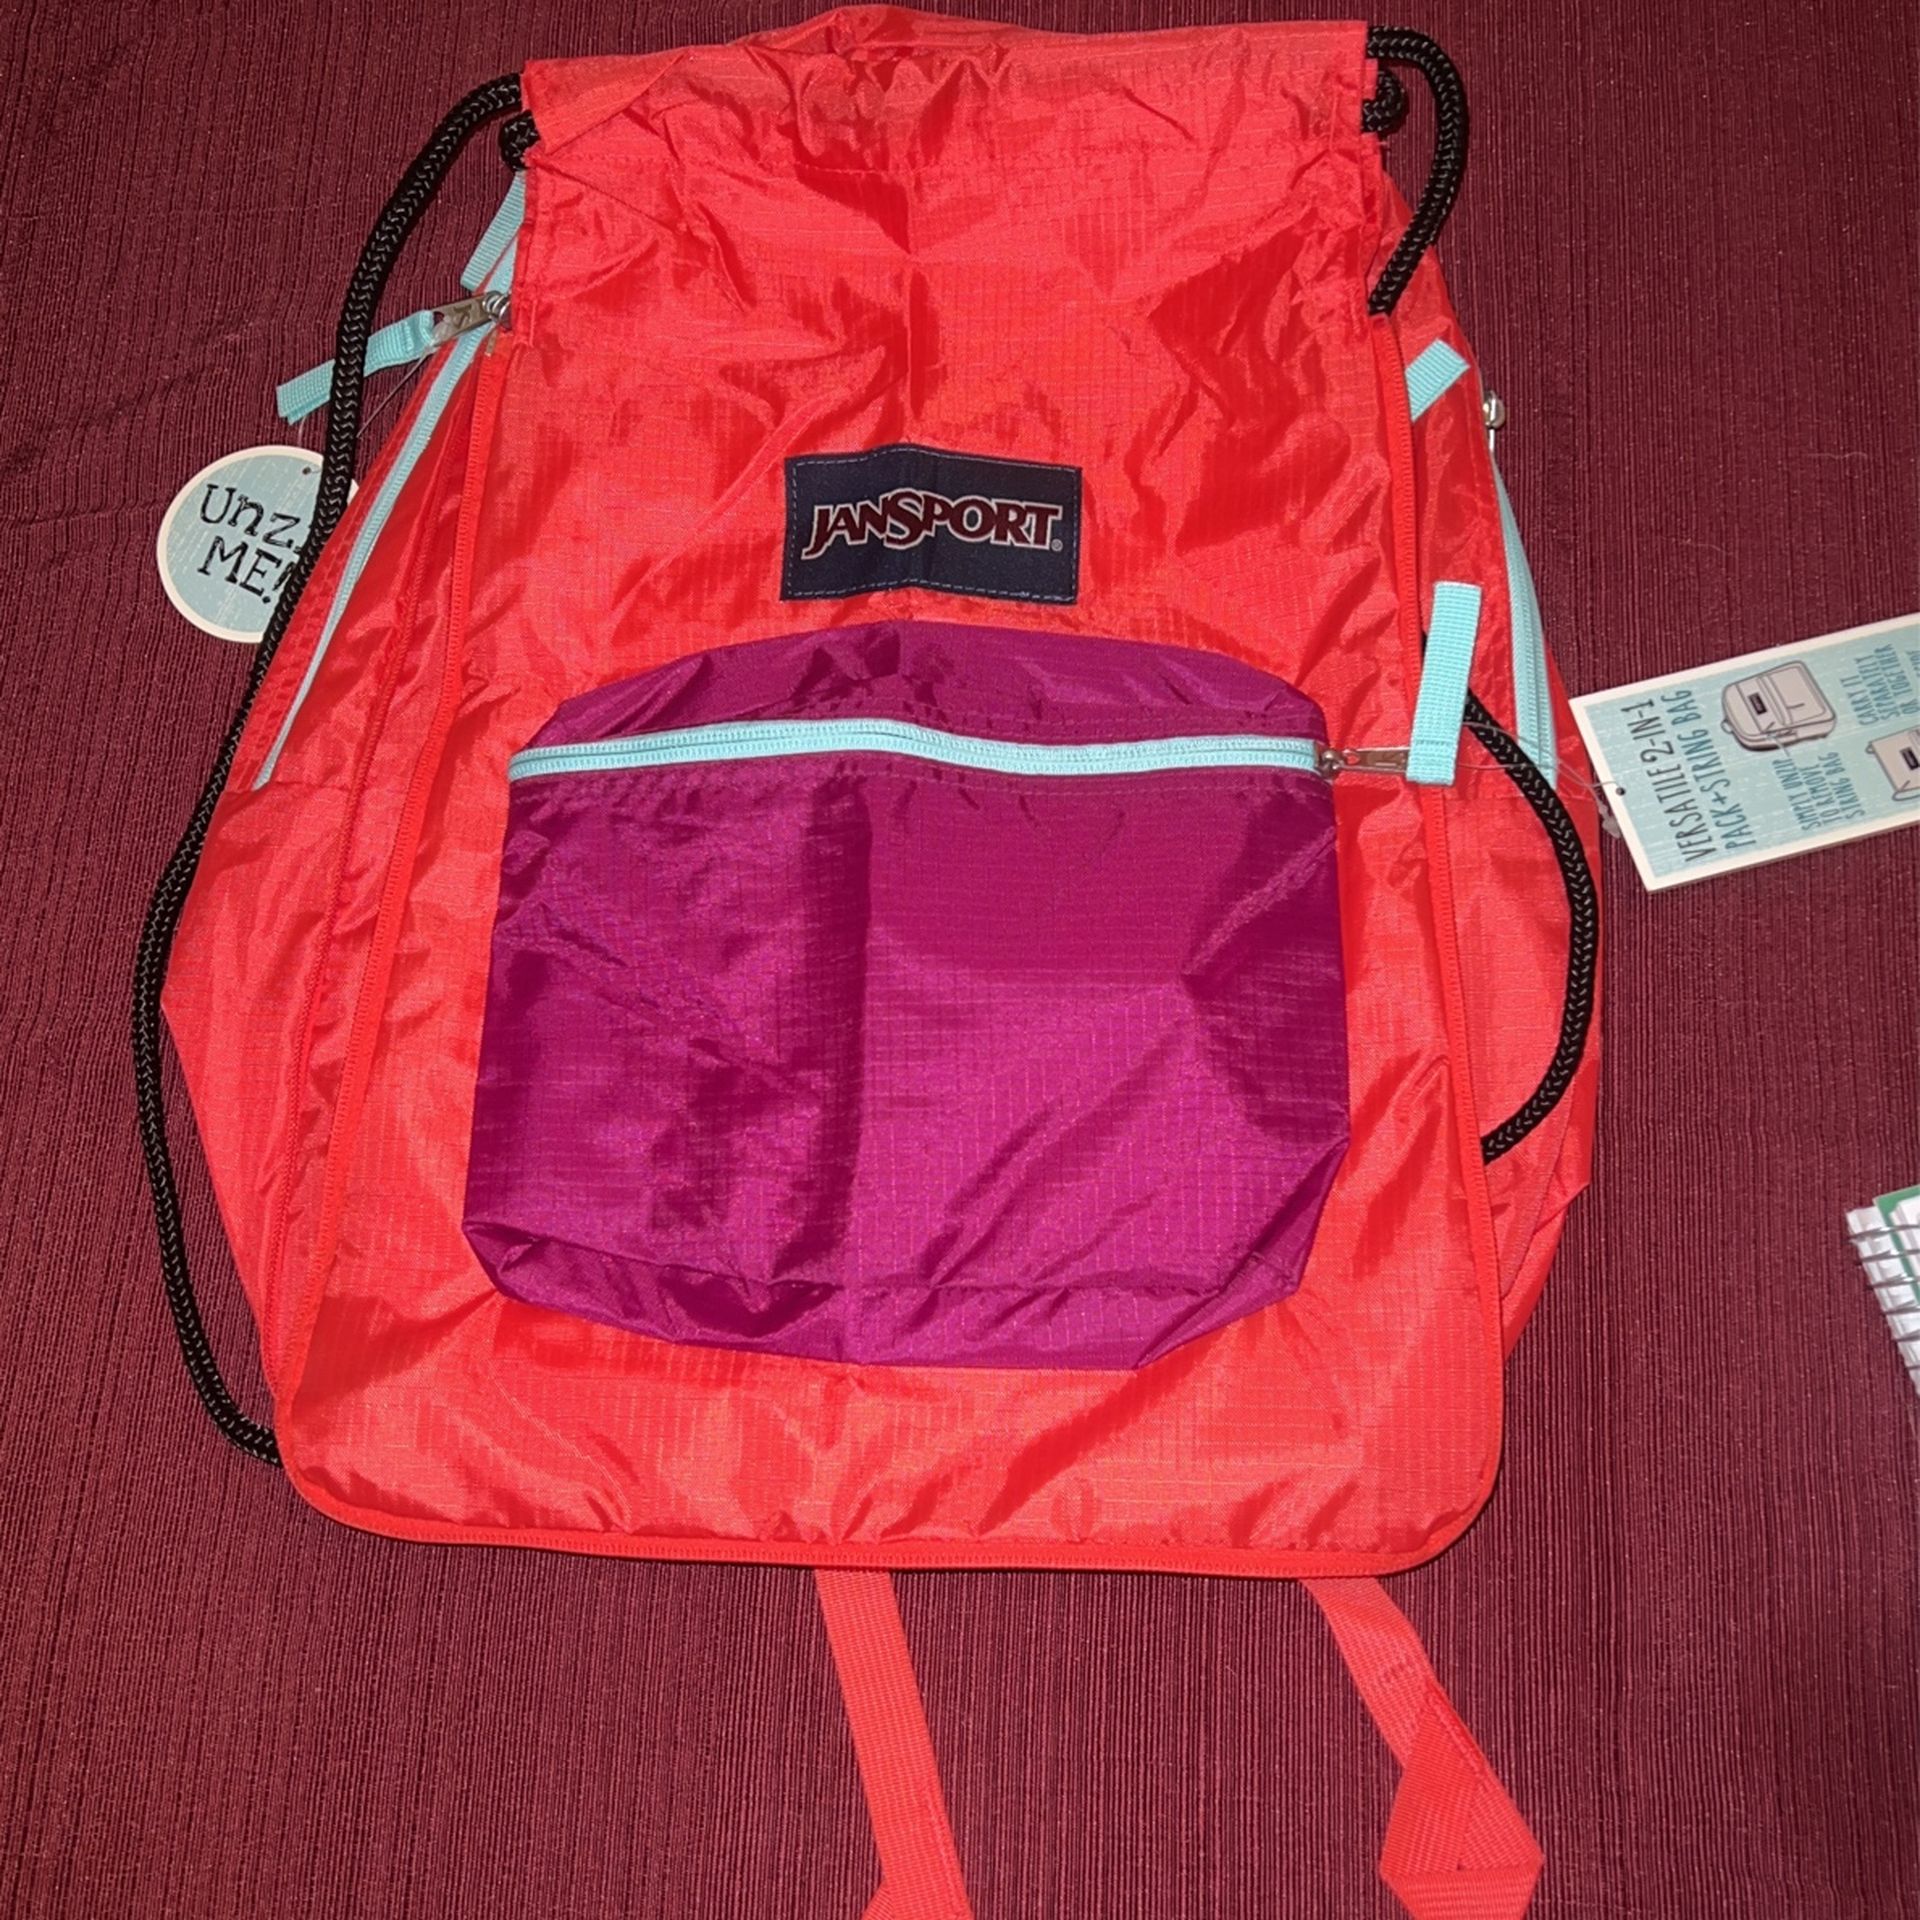 NWT 2 In 1 Backpack And String Bag JANSPORT  FUSER Coral/Berry